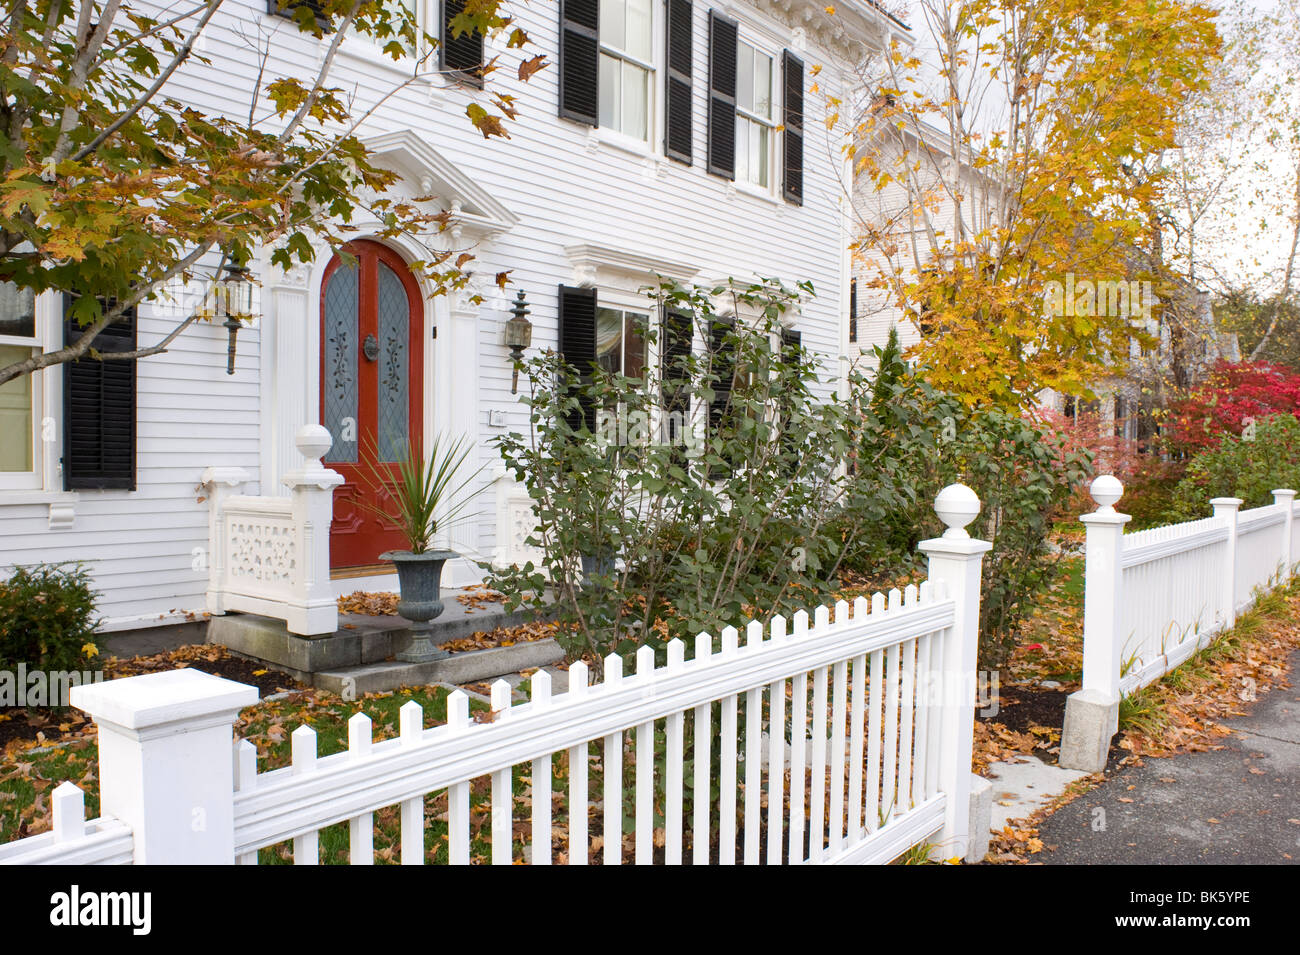 A traditional wood house and picket fence surrounded by autumn leaves in Woodstock, Vermont, USA Stock Photo